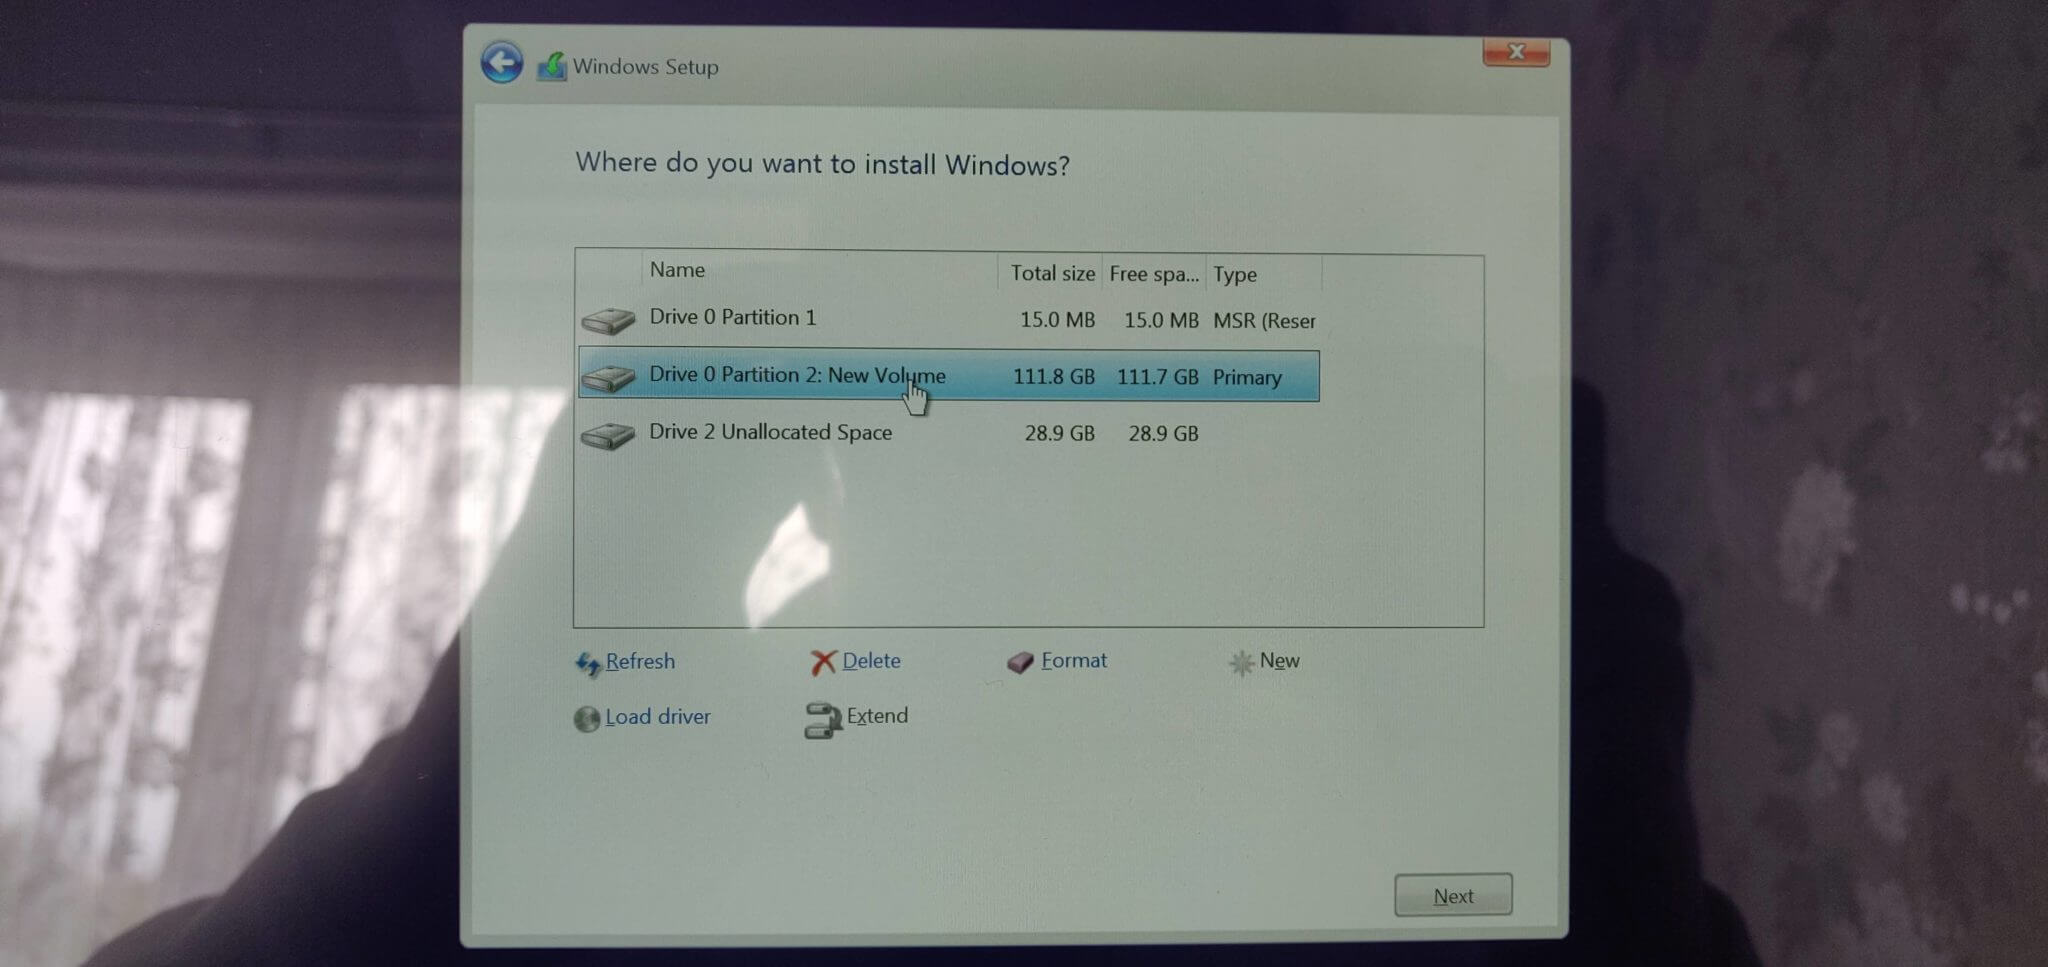 Windows Installation photo showing Drive 0 Partition 2 New Volume which I created earlier